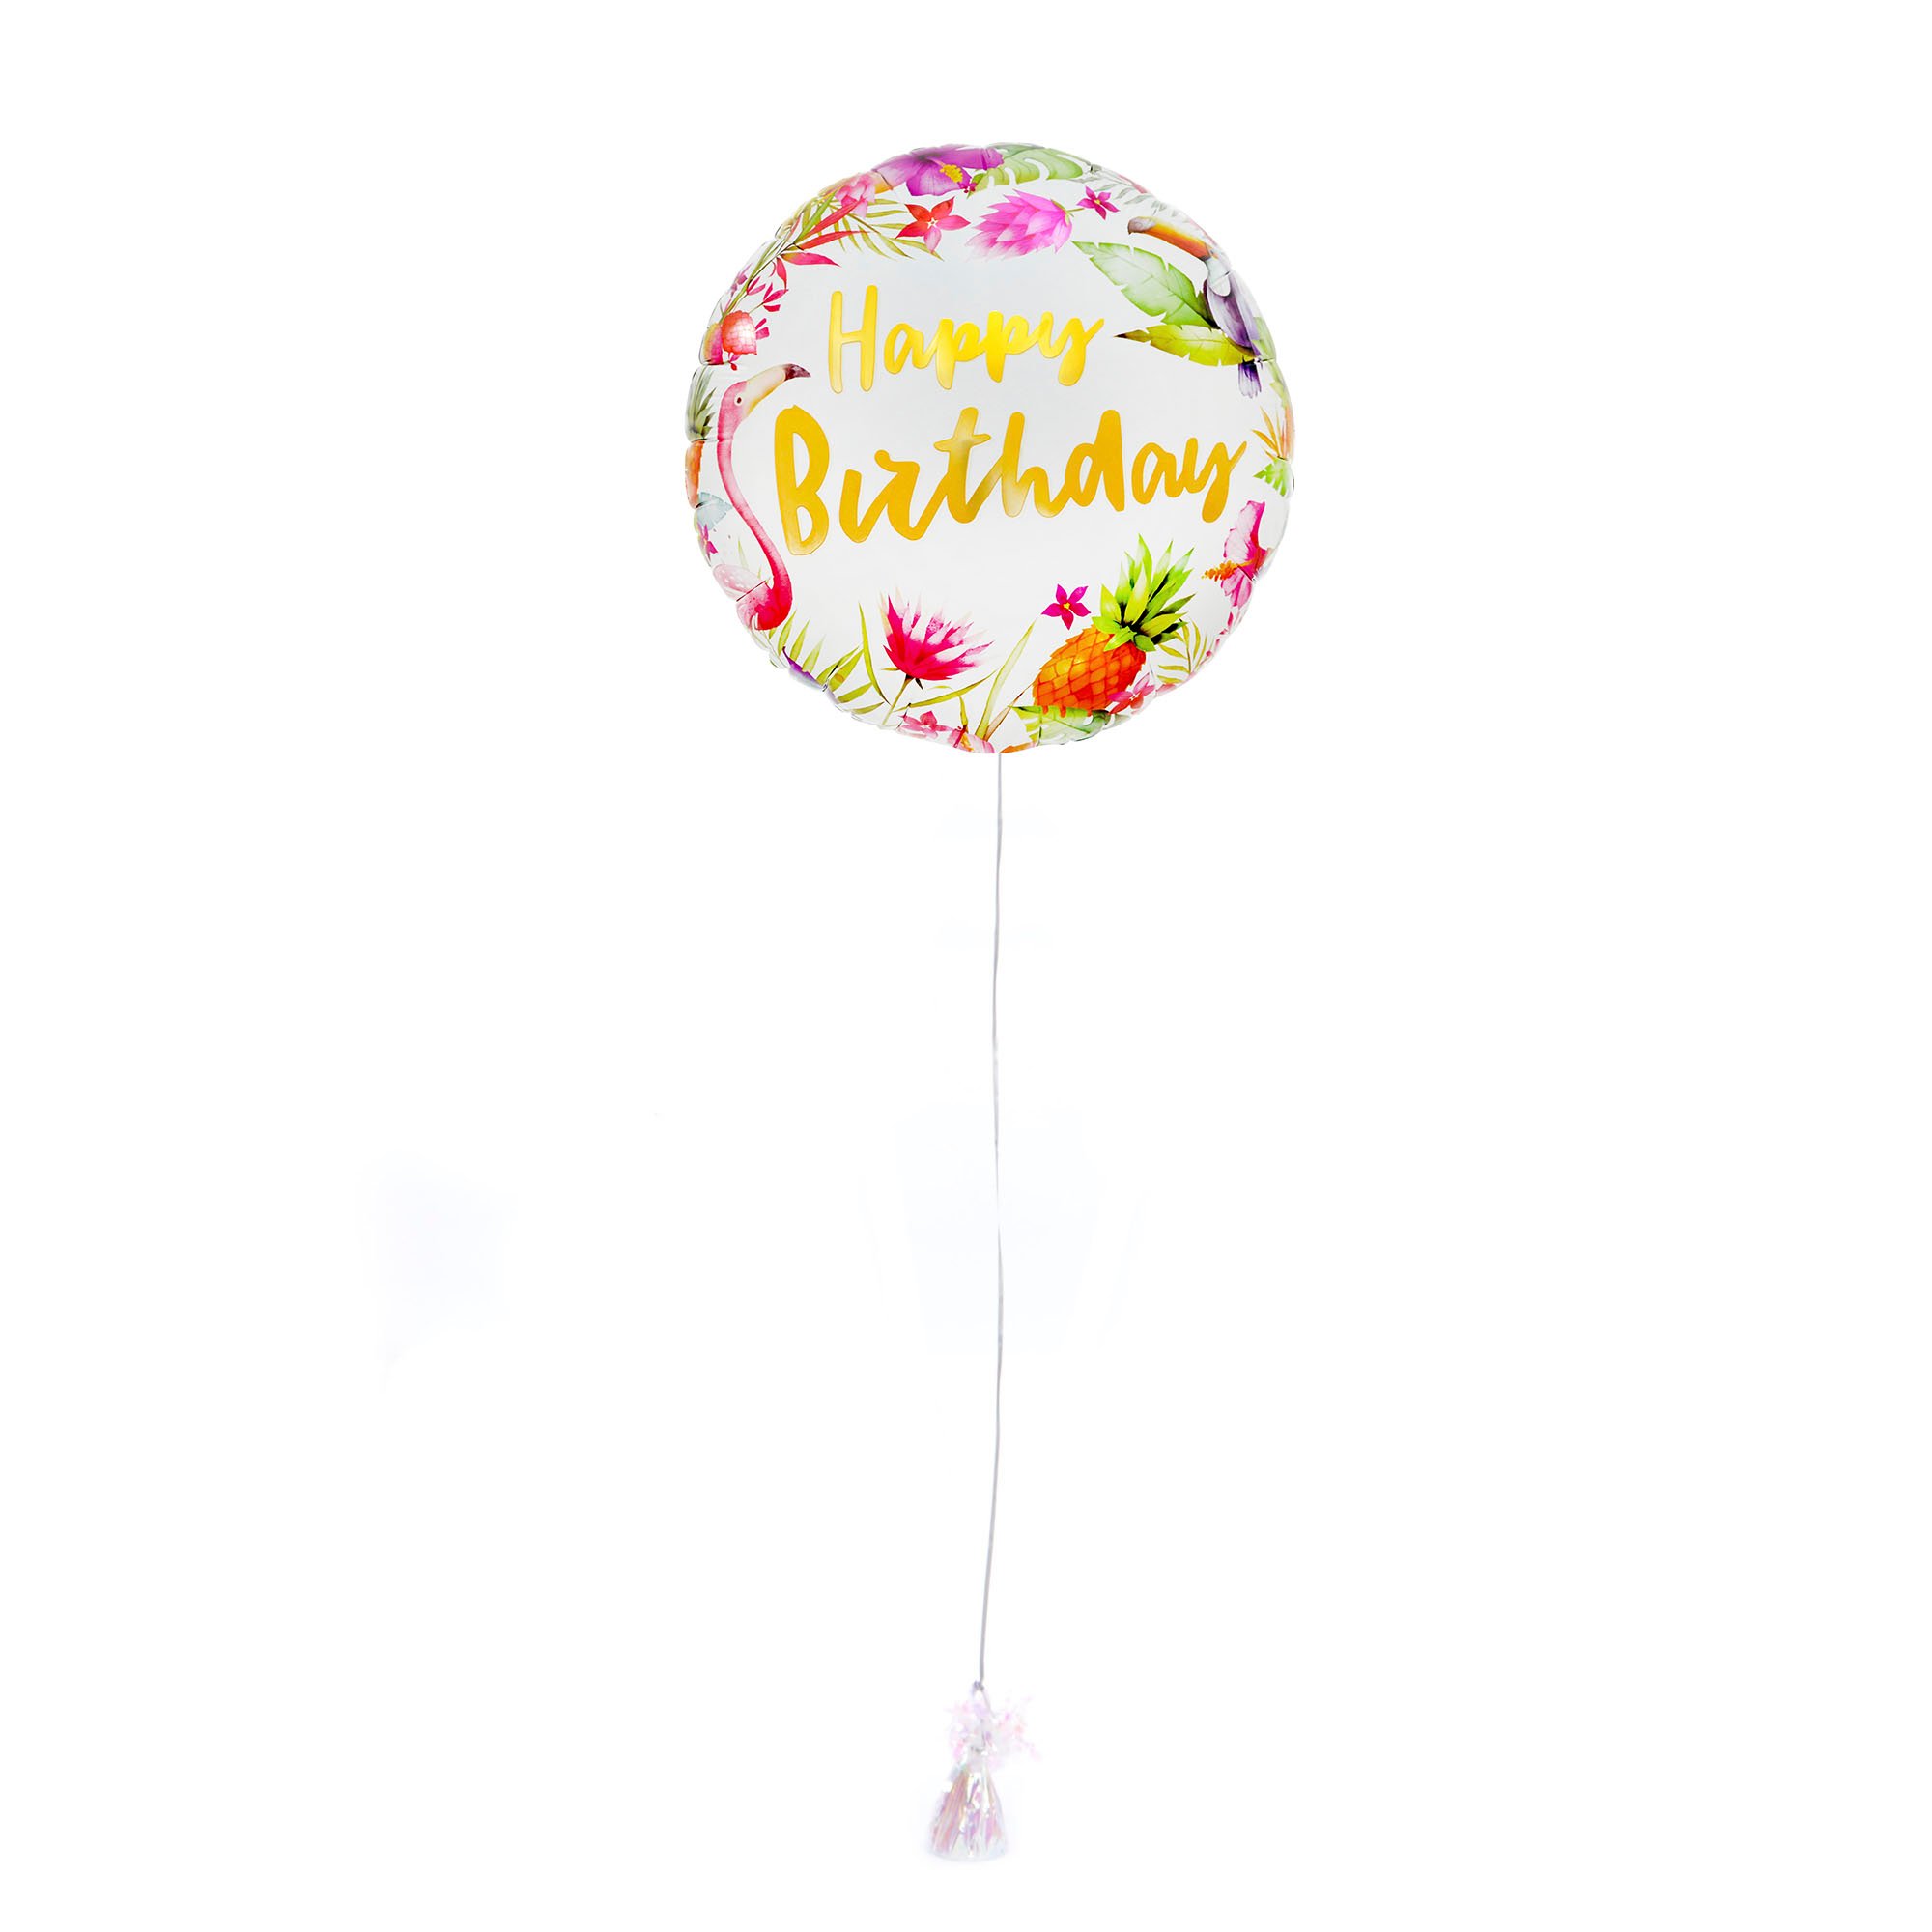 Tropical Happy Birthday Balloon & Lindt Chocolates - FREE GIFT CARD!